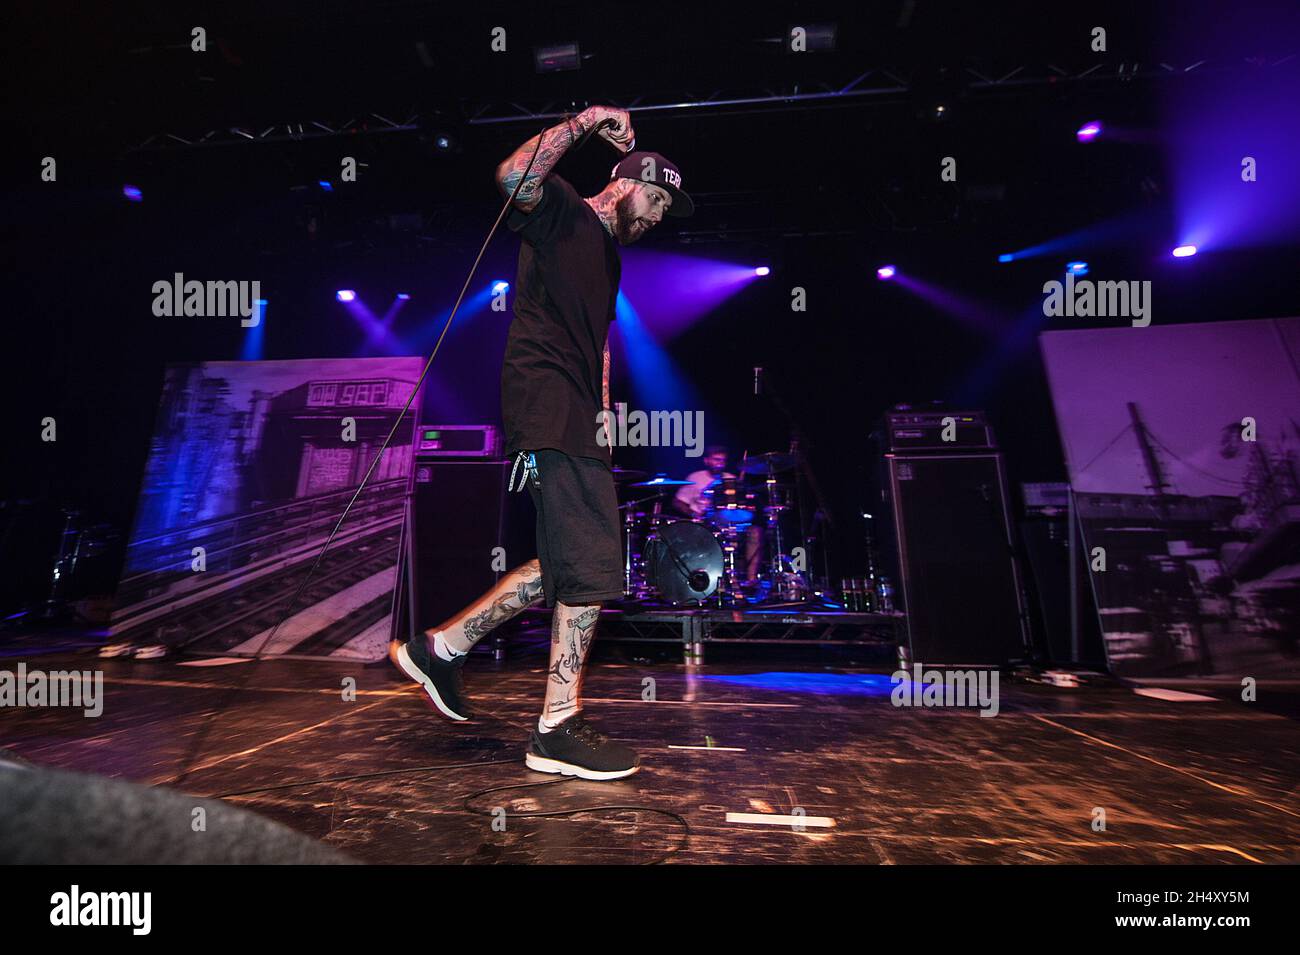 JJ Peters of Deez Nuts performing live on stage during IMPERICON Festival at 02 Academy on May 04, 2015 in Manchester, United Kingdom Stock Photo